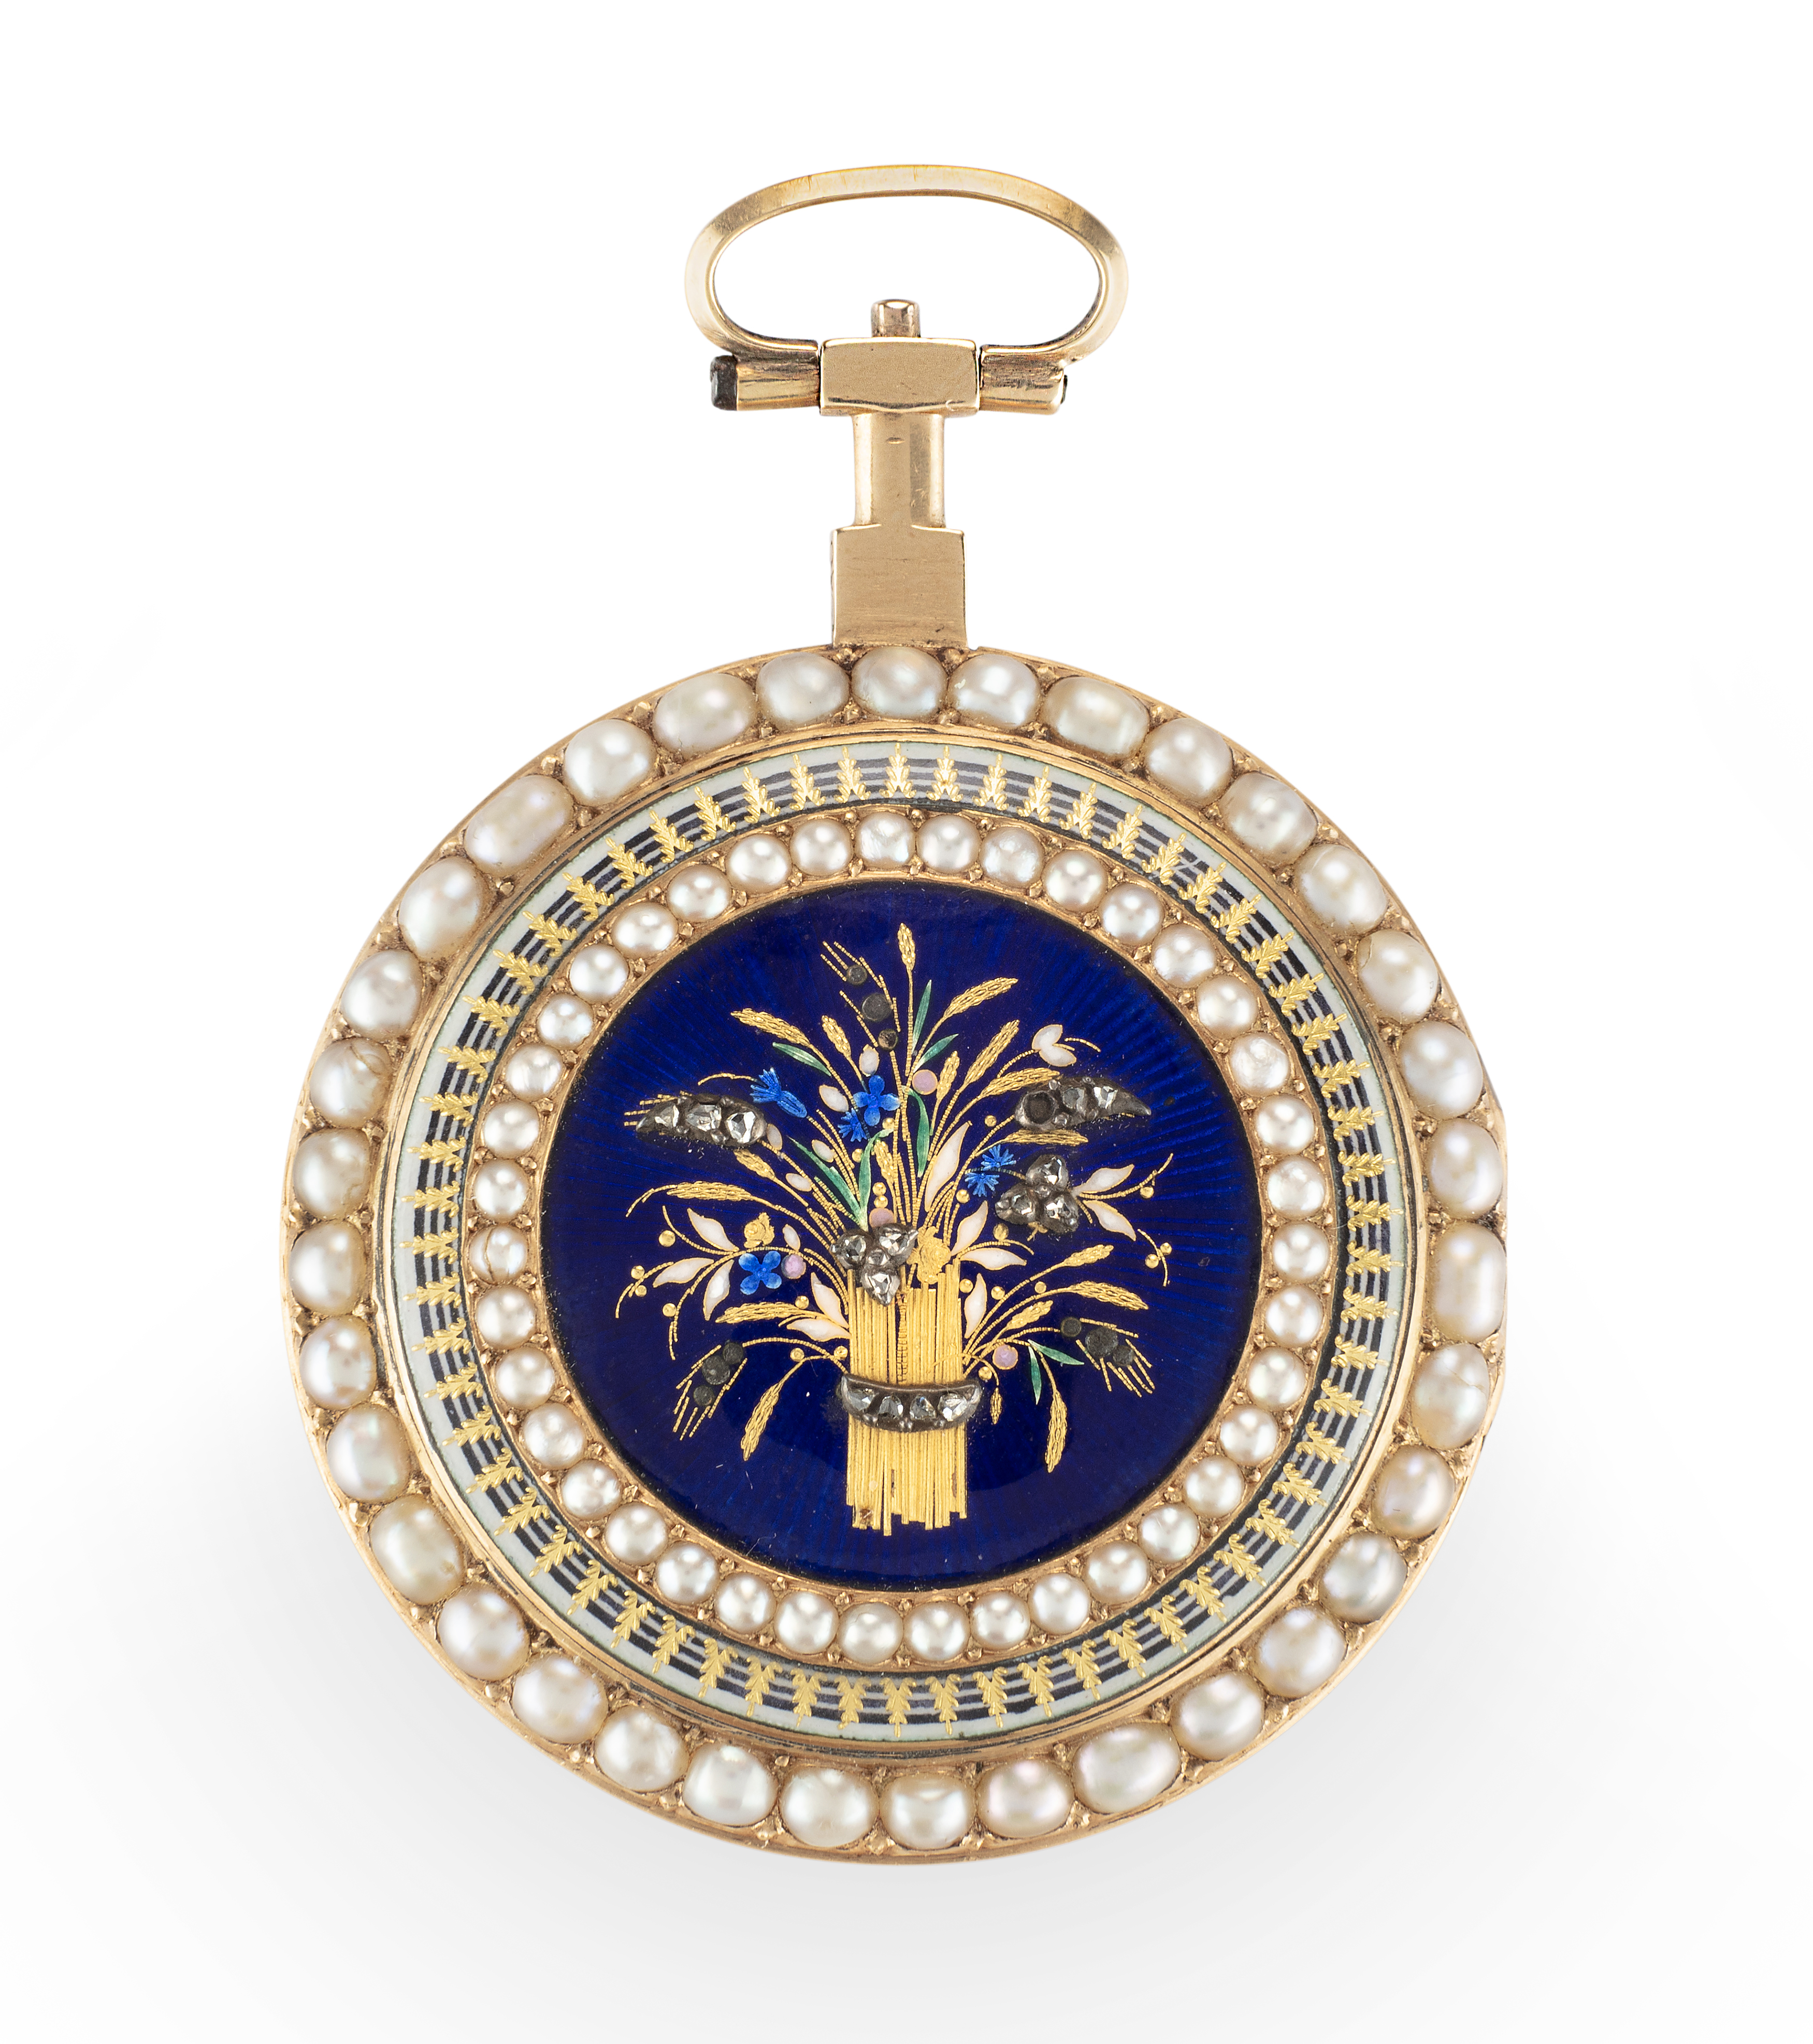 Guex, Paris, an enamel and pearl set open face pocket watch,  C.1790, Gilt full plate verge movem... - Image 2 of 2